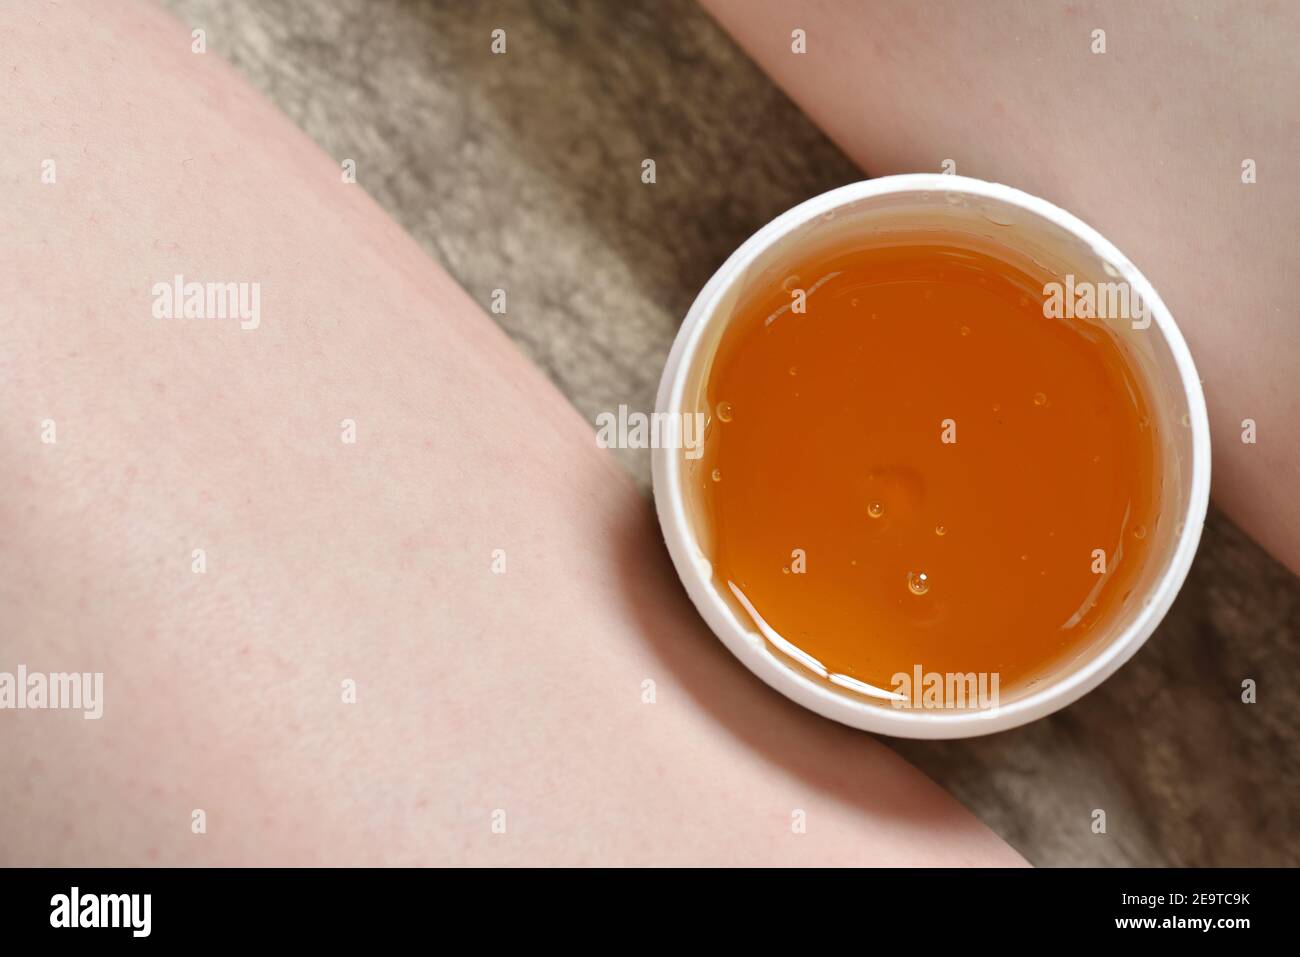 Sugar paste in a jar between the legs of a woman. Depilation Sugaring. Beauty and skin care concept. Stock Photo